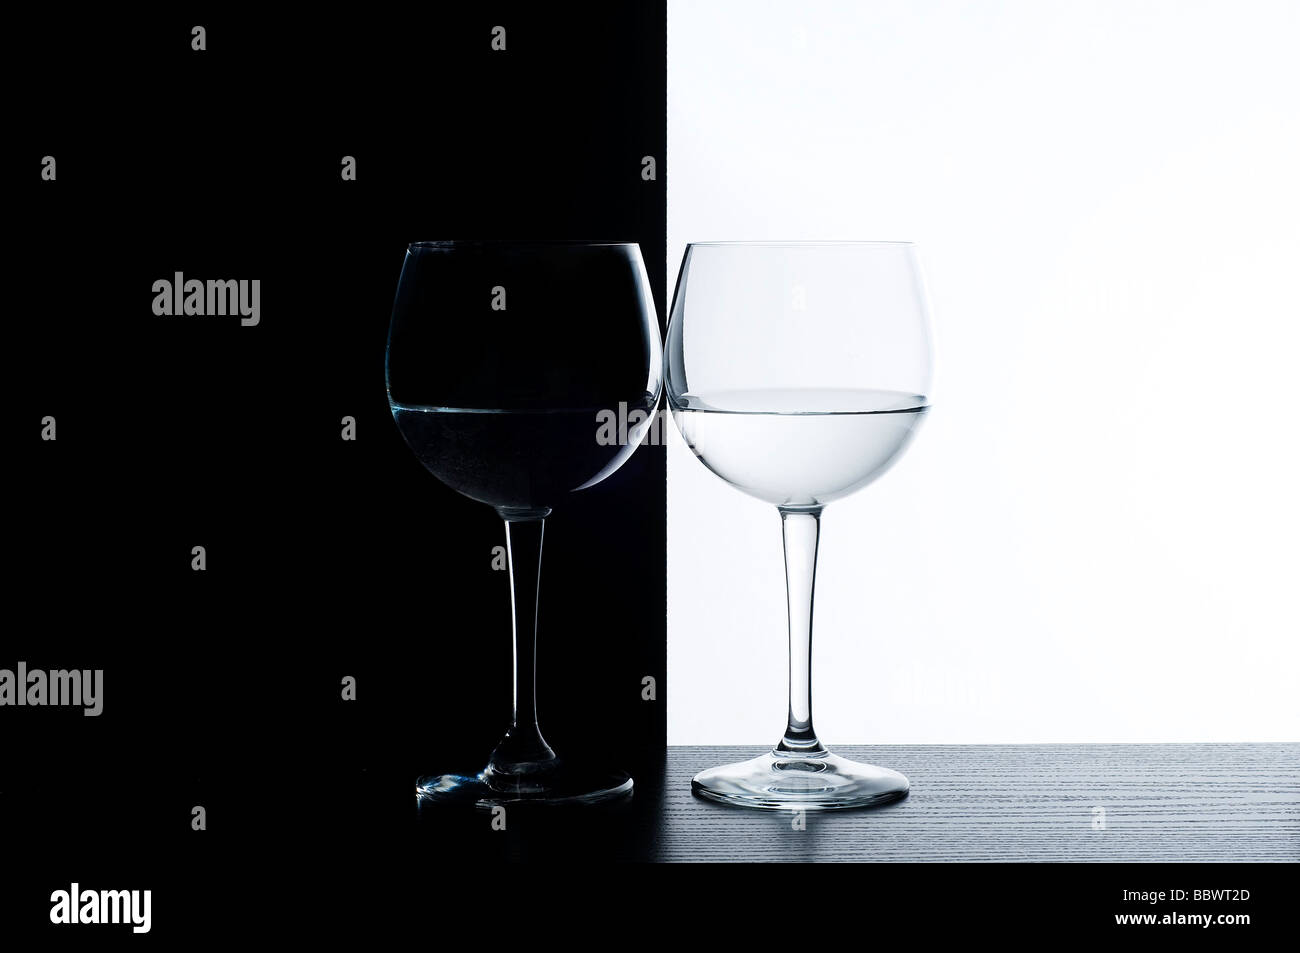 the wine glasses in front of a black and white background Stock Photo